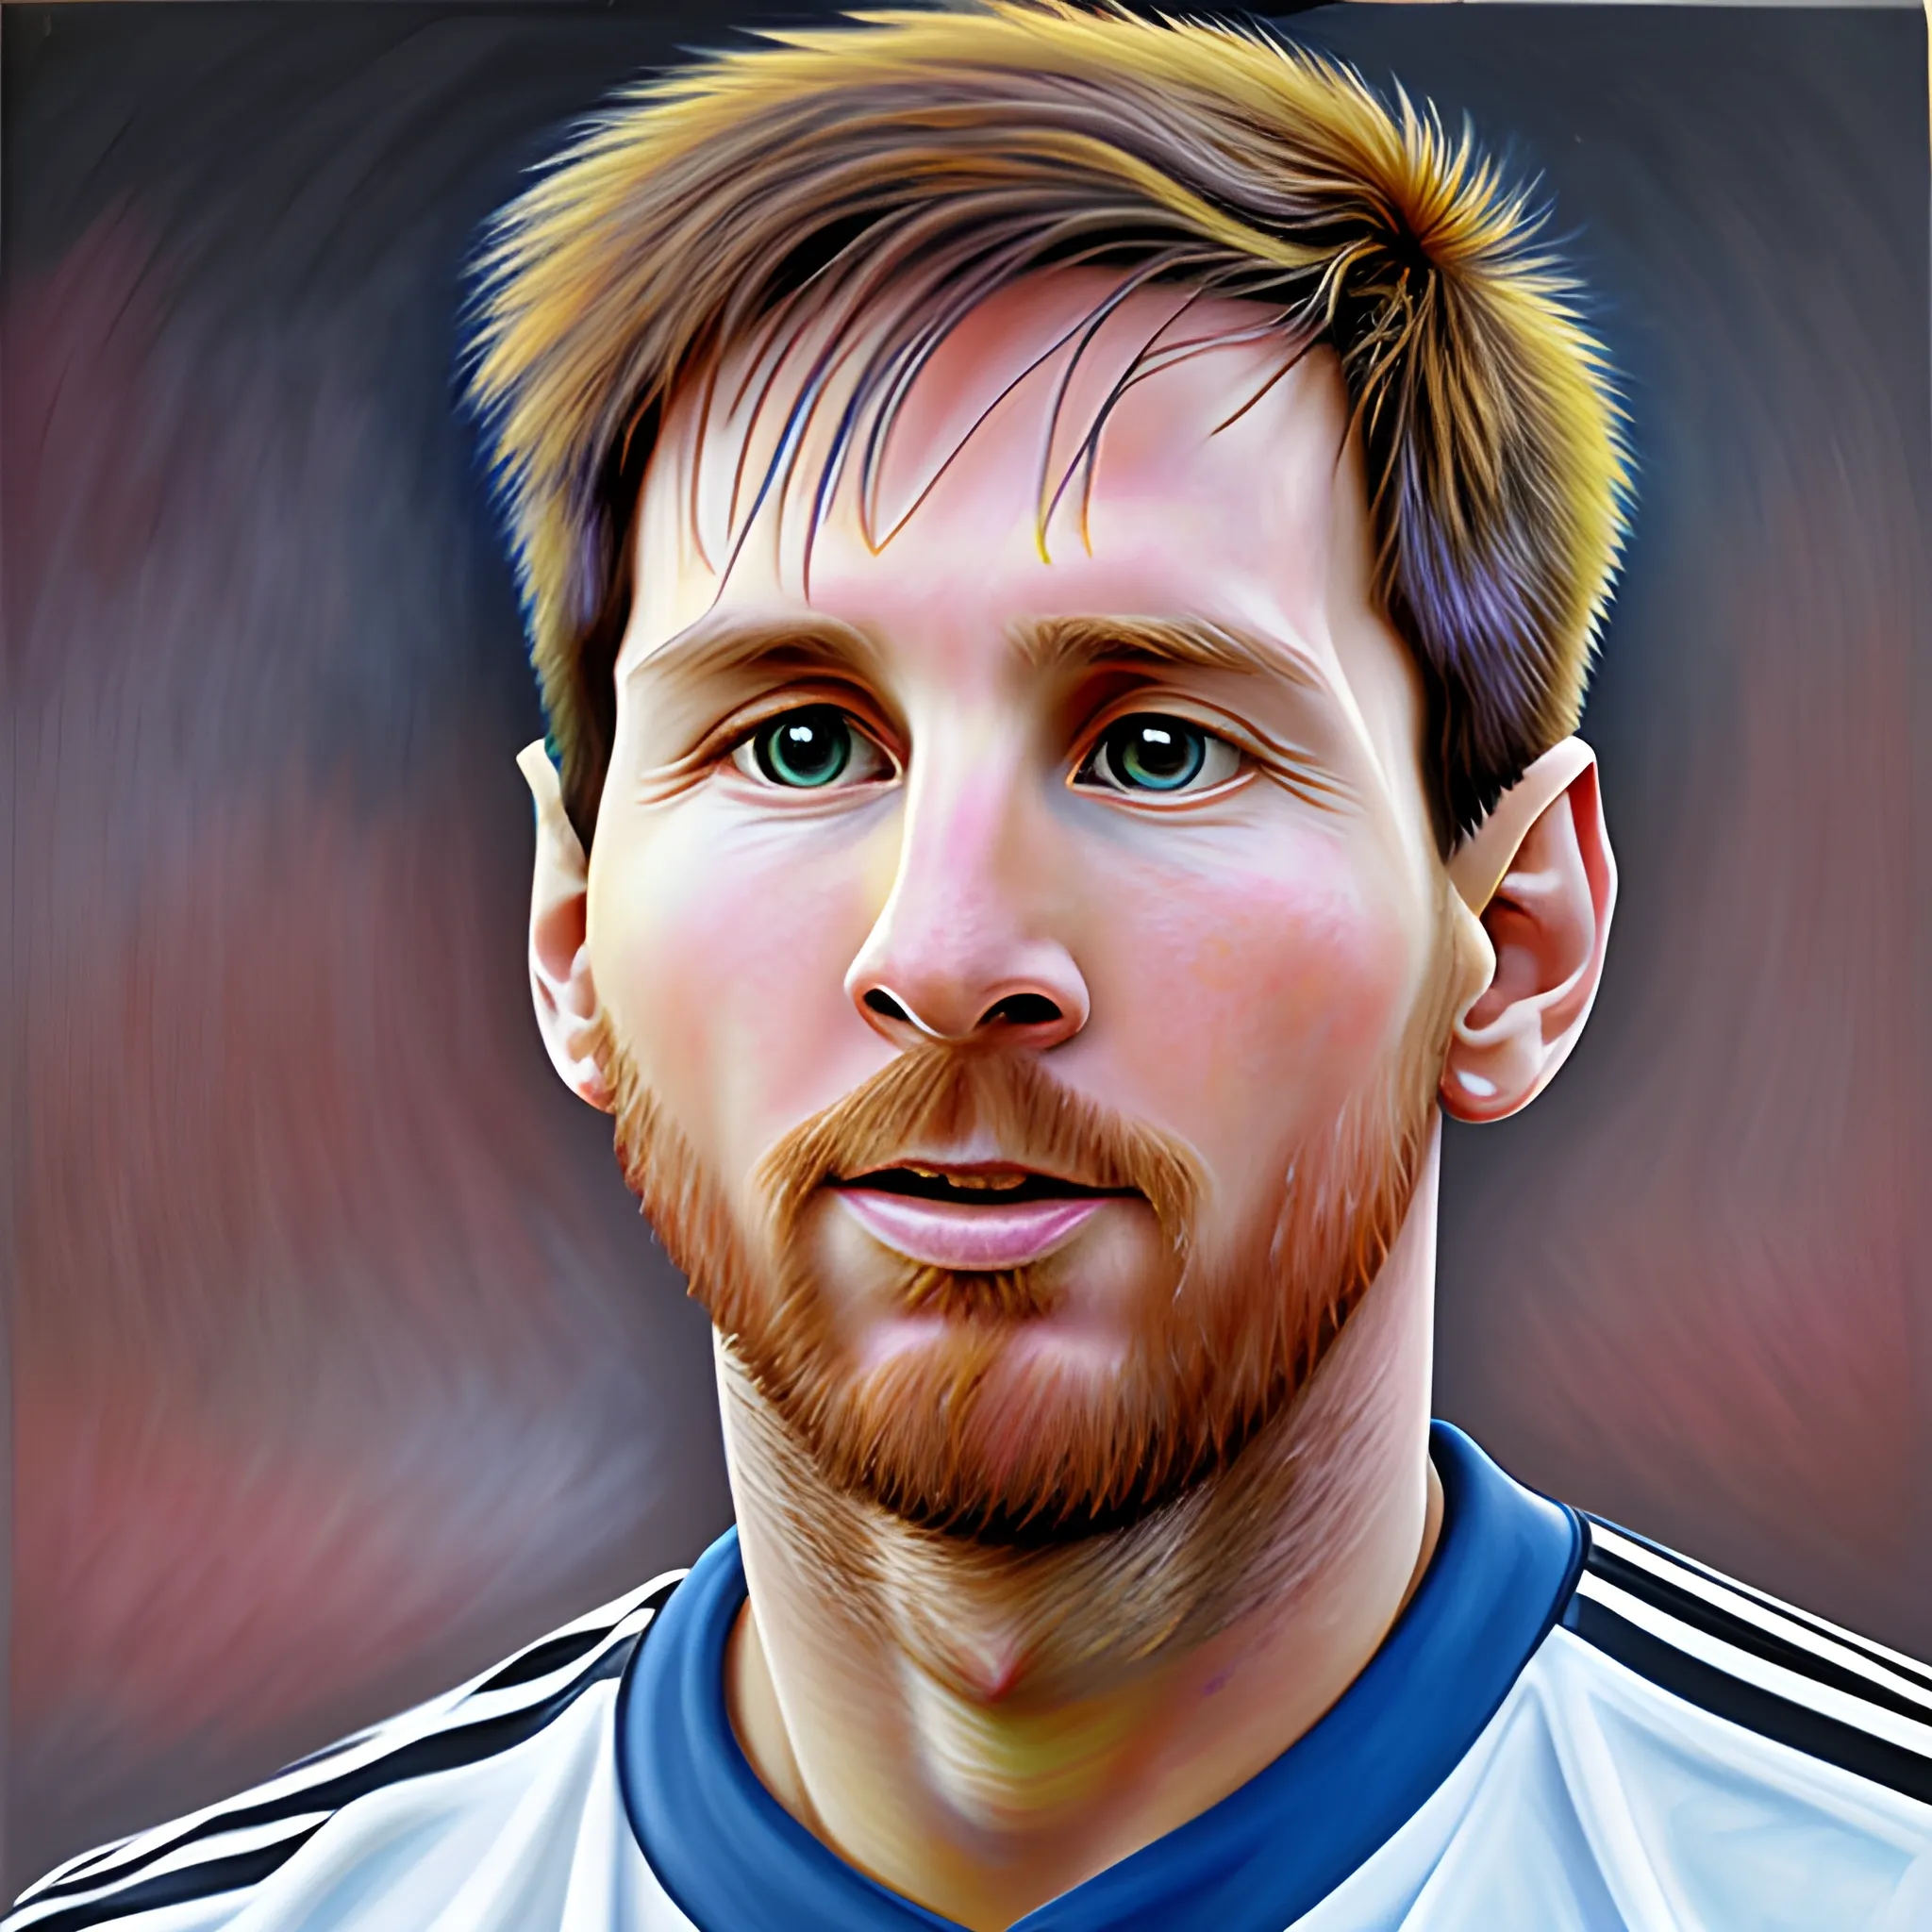 Oil Painting messi